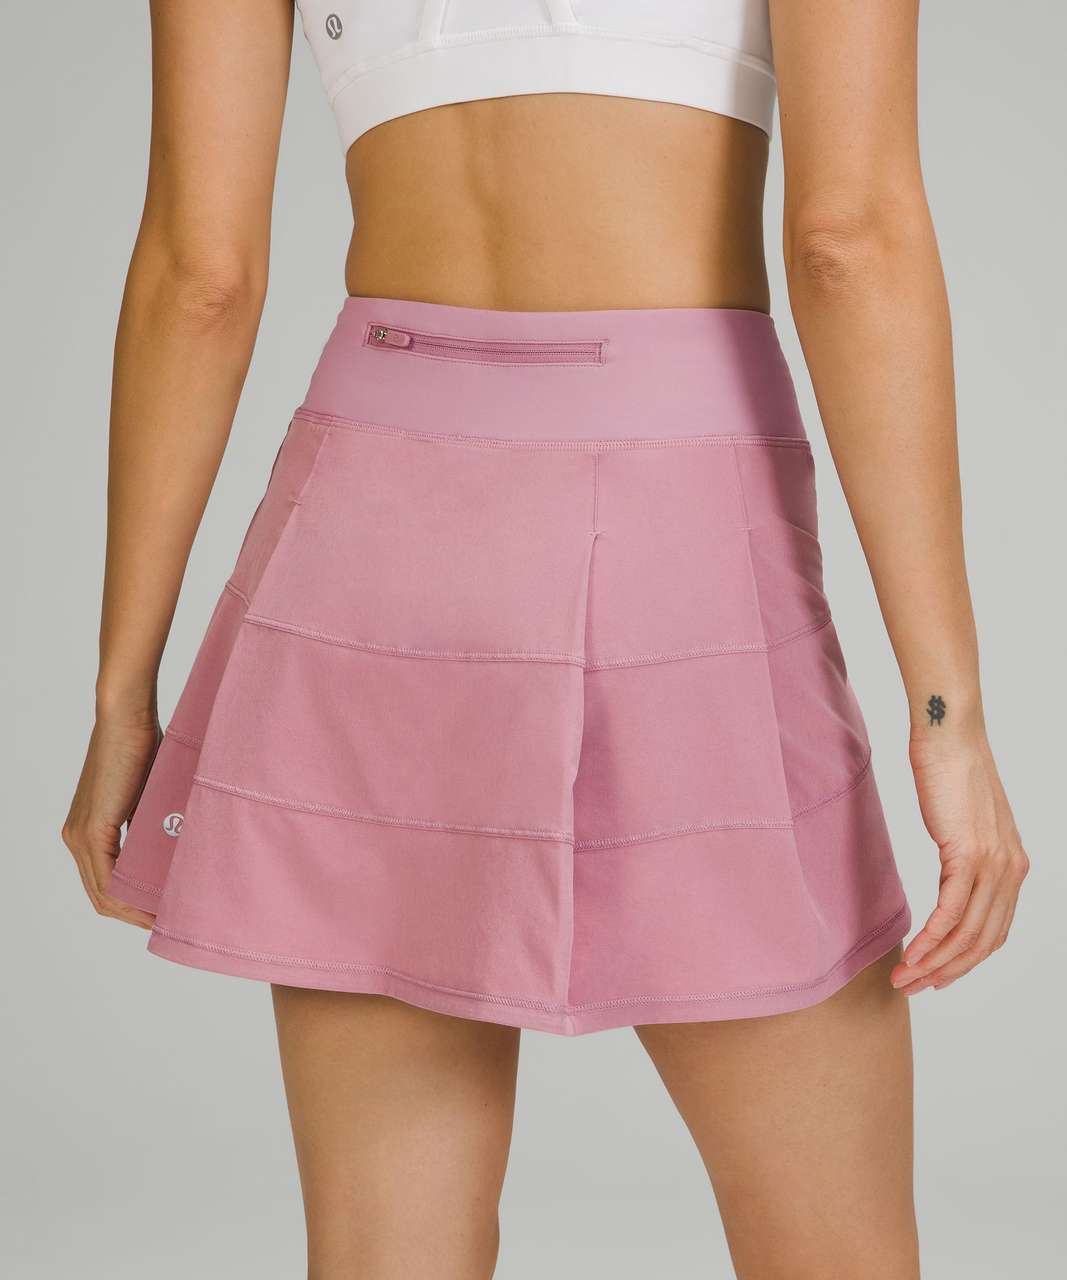 Lululemon Pace Rival Mid-Rise Skirt 15" Length - Pink Taupe